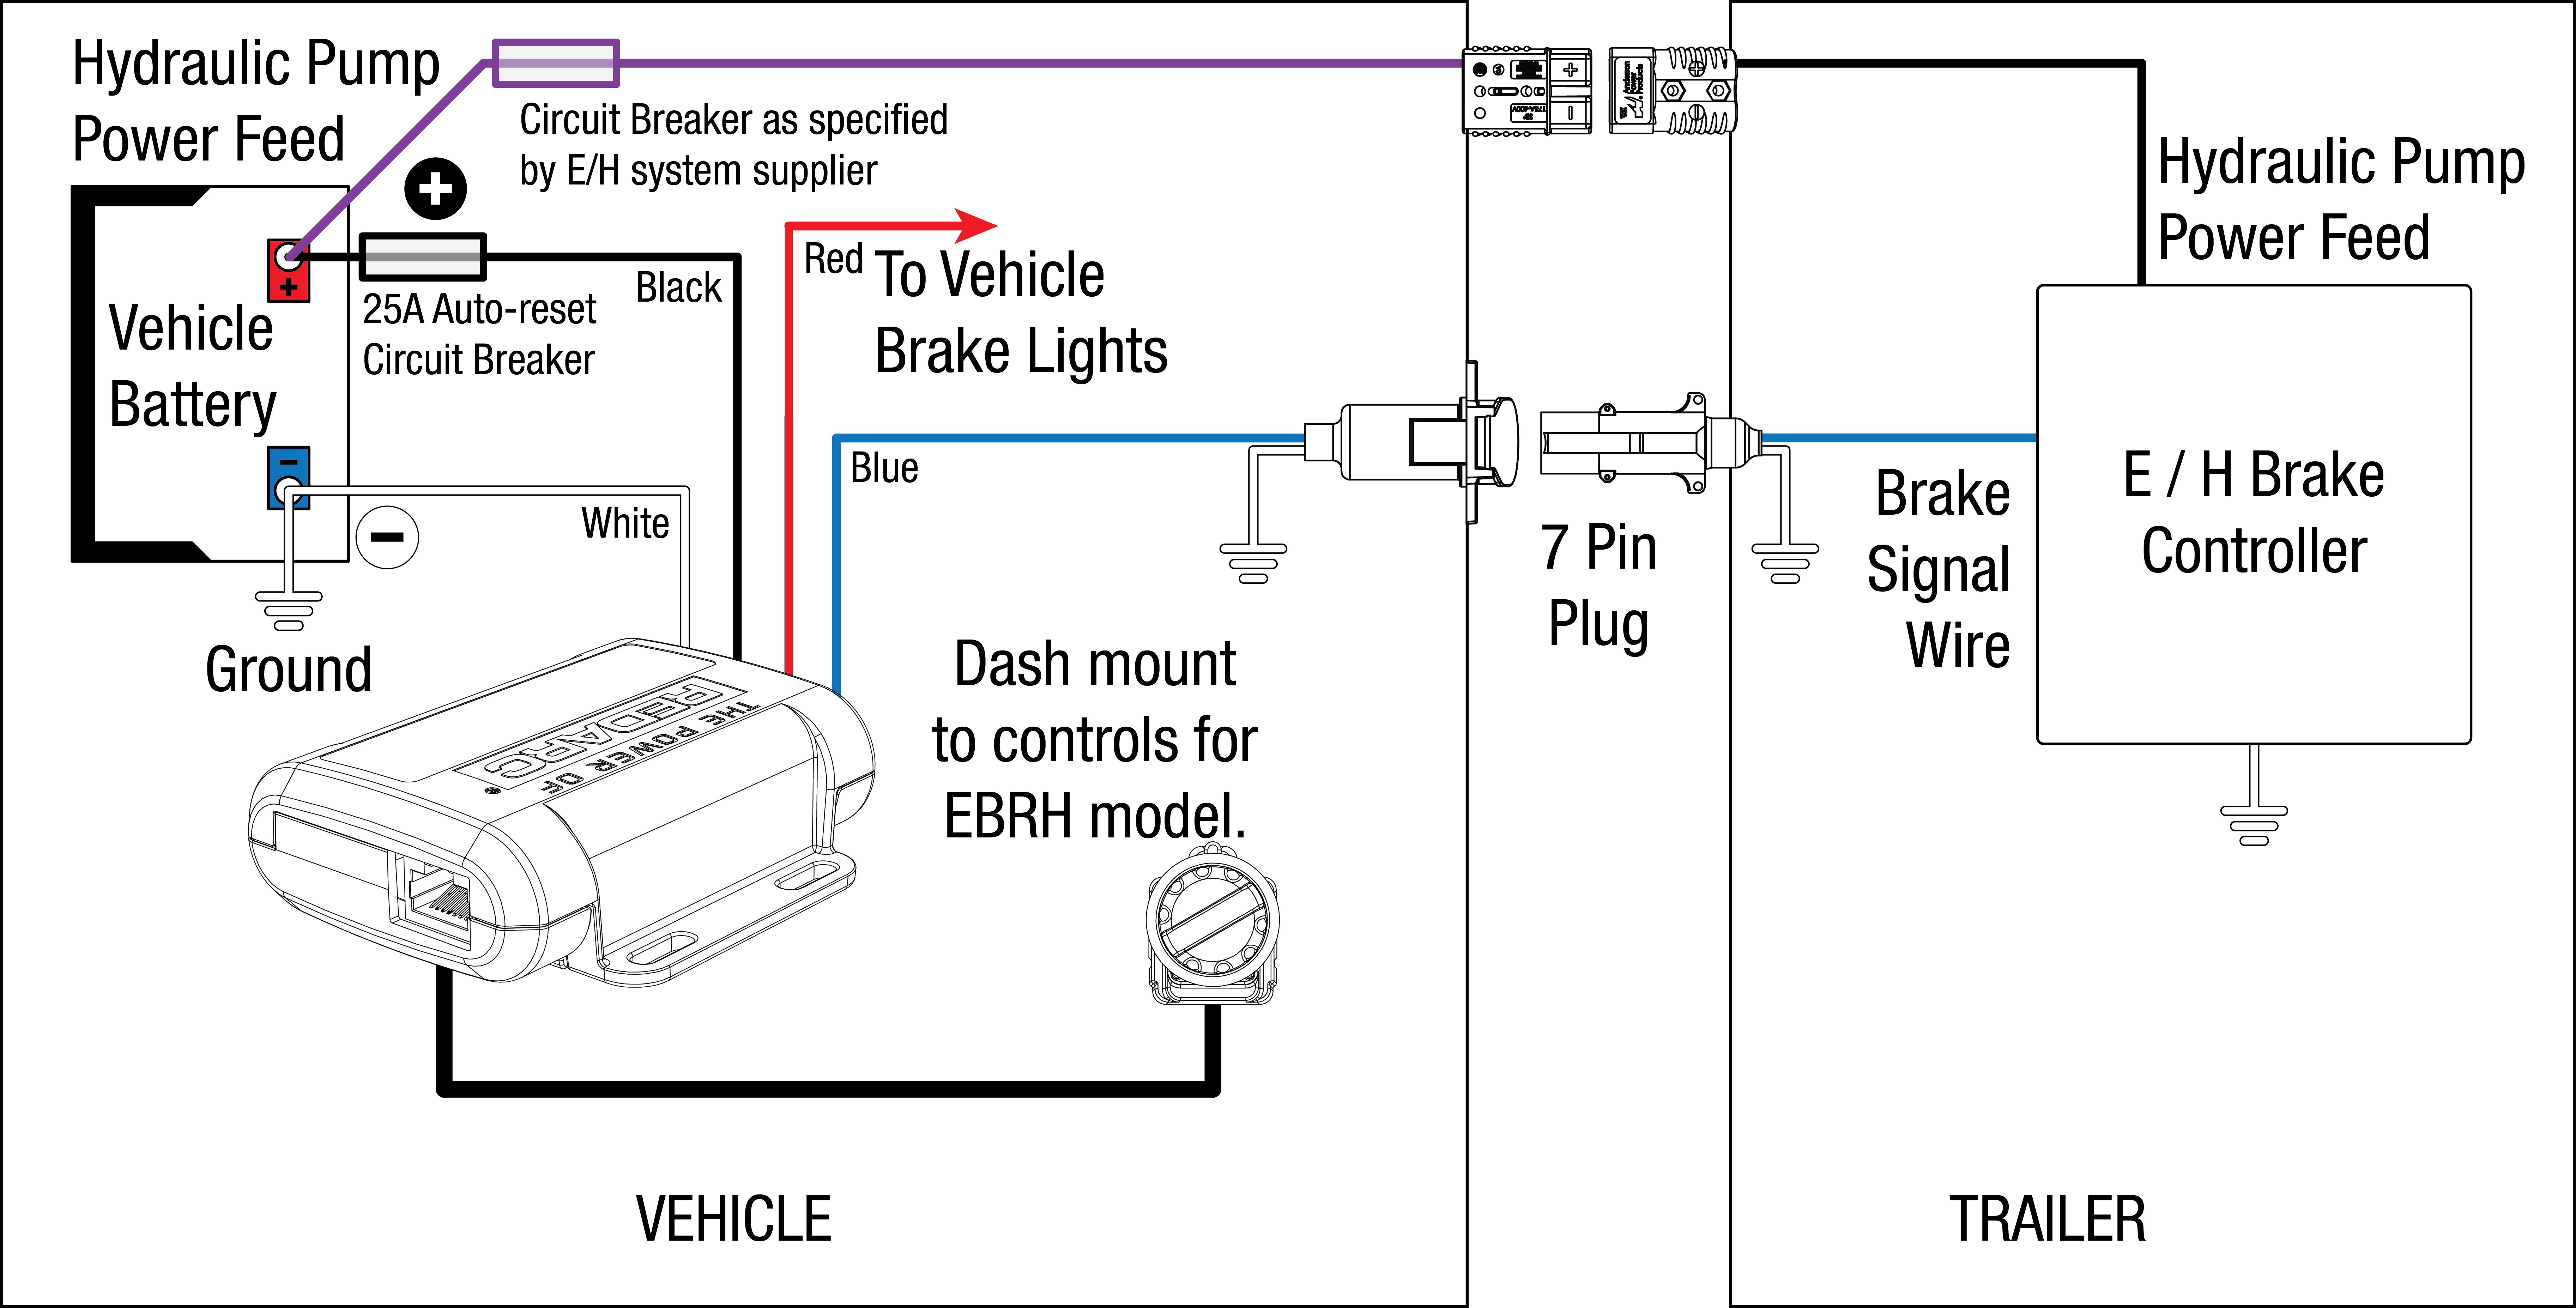 Trailer Breakaway Switch Wiring Diagram Lovely Electric Trailer Brake Controller Wiring Diagram and Inst 03